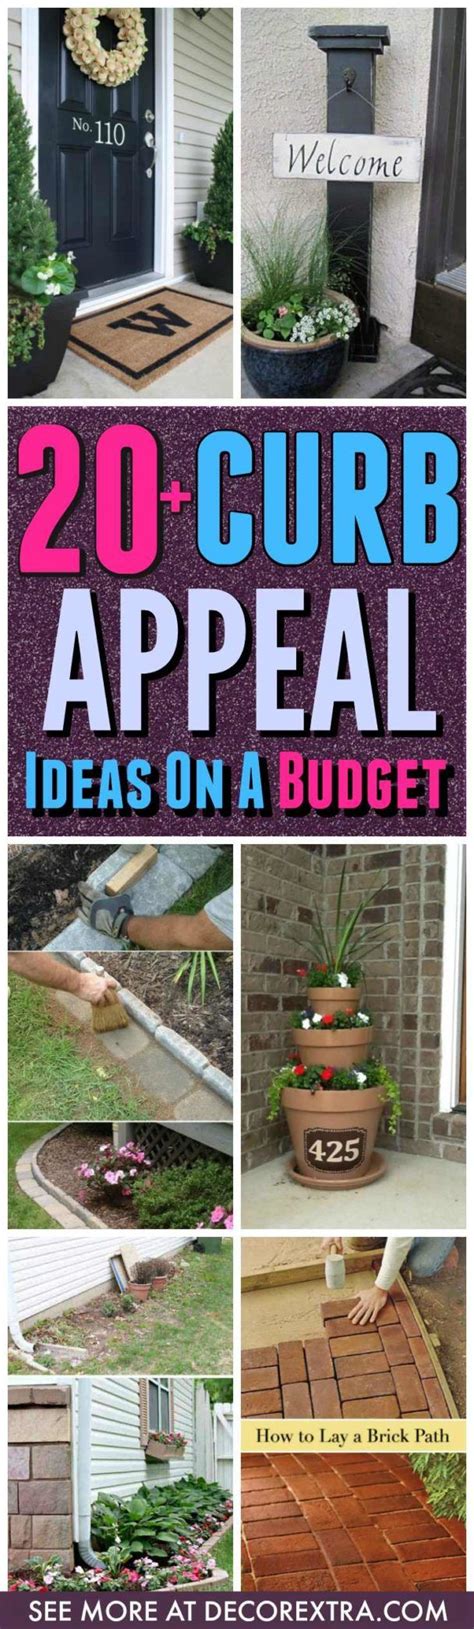 Curb Appeal Ideas On A Budget Today We Present You One Collection Of